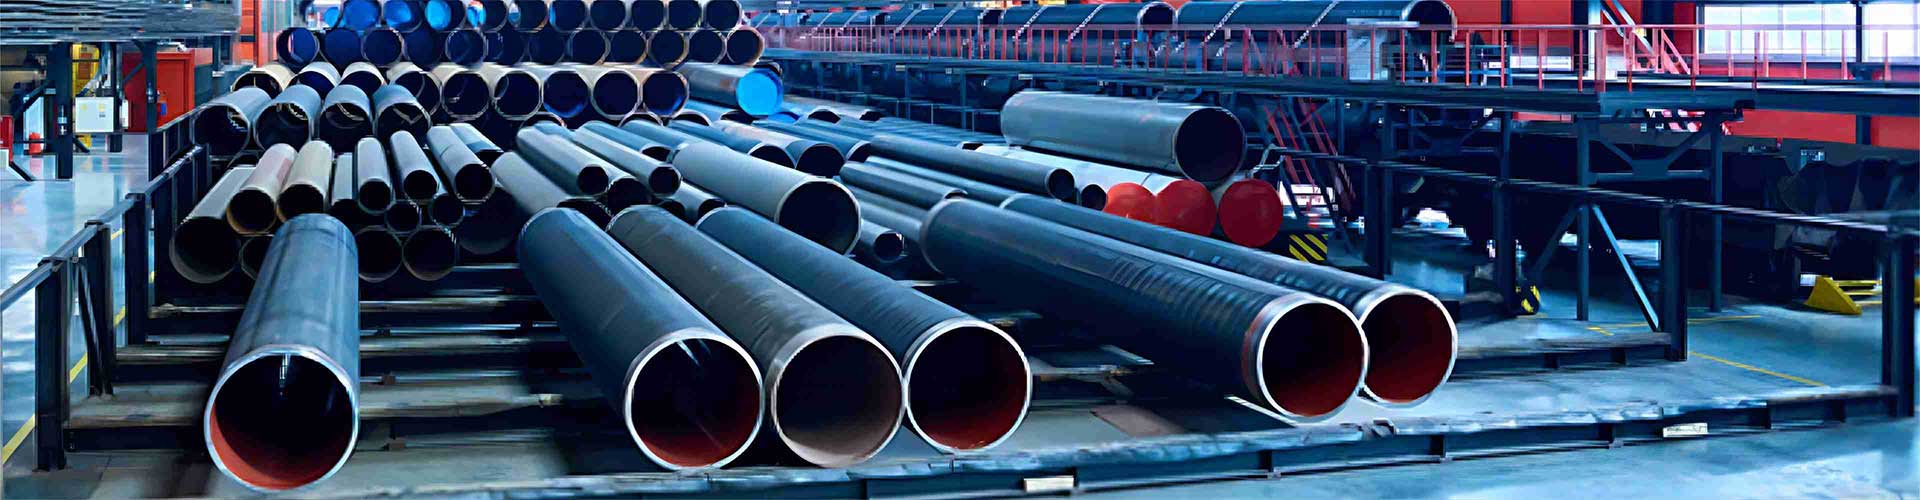 Alloy steel pipe,Coating Steel Pipe,Oilfiled Tubulars(OCTG),Pipe Fitting,Seamless steel pipe,Special Steel,Stainless Steel Pipe,Welded steel pipe